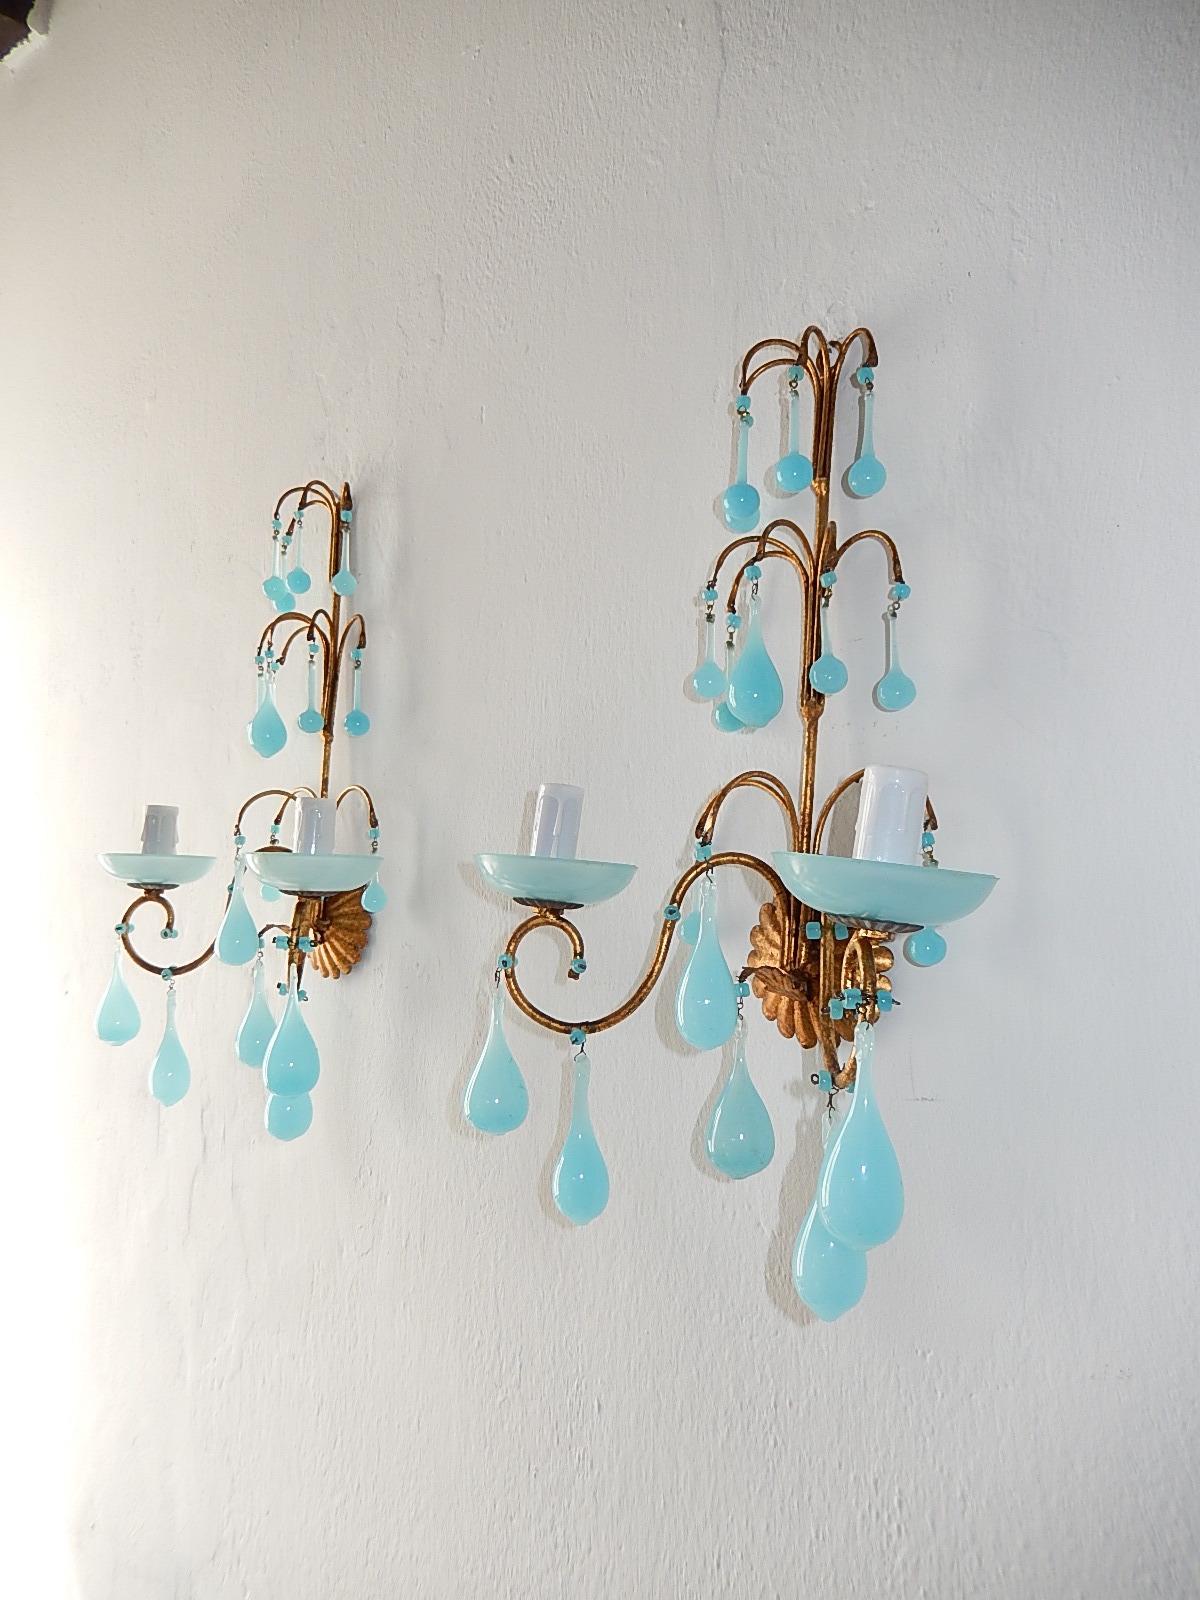 Housing two lights each, sitting in blue opaline bobéches. Adorning blue opaline Murano drops and beads. Re-wired and ready to hang! Free priority UPS shipping from Italy.